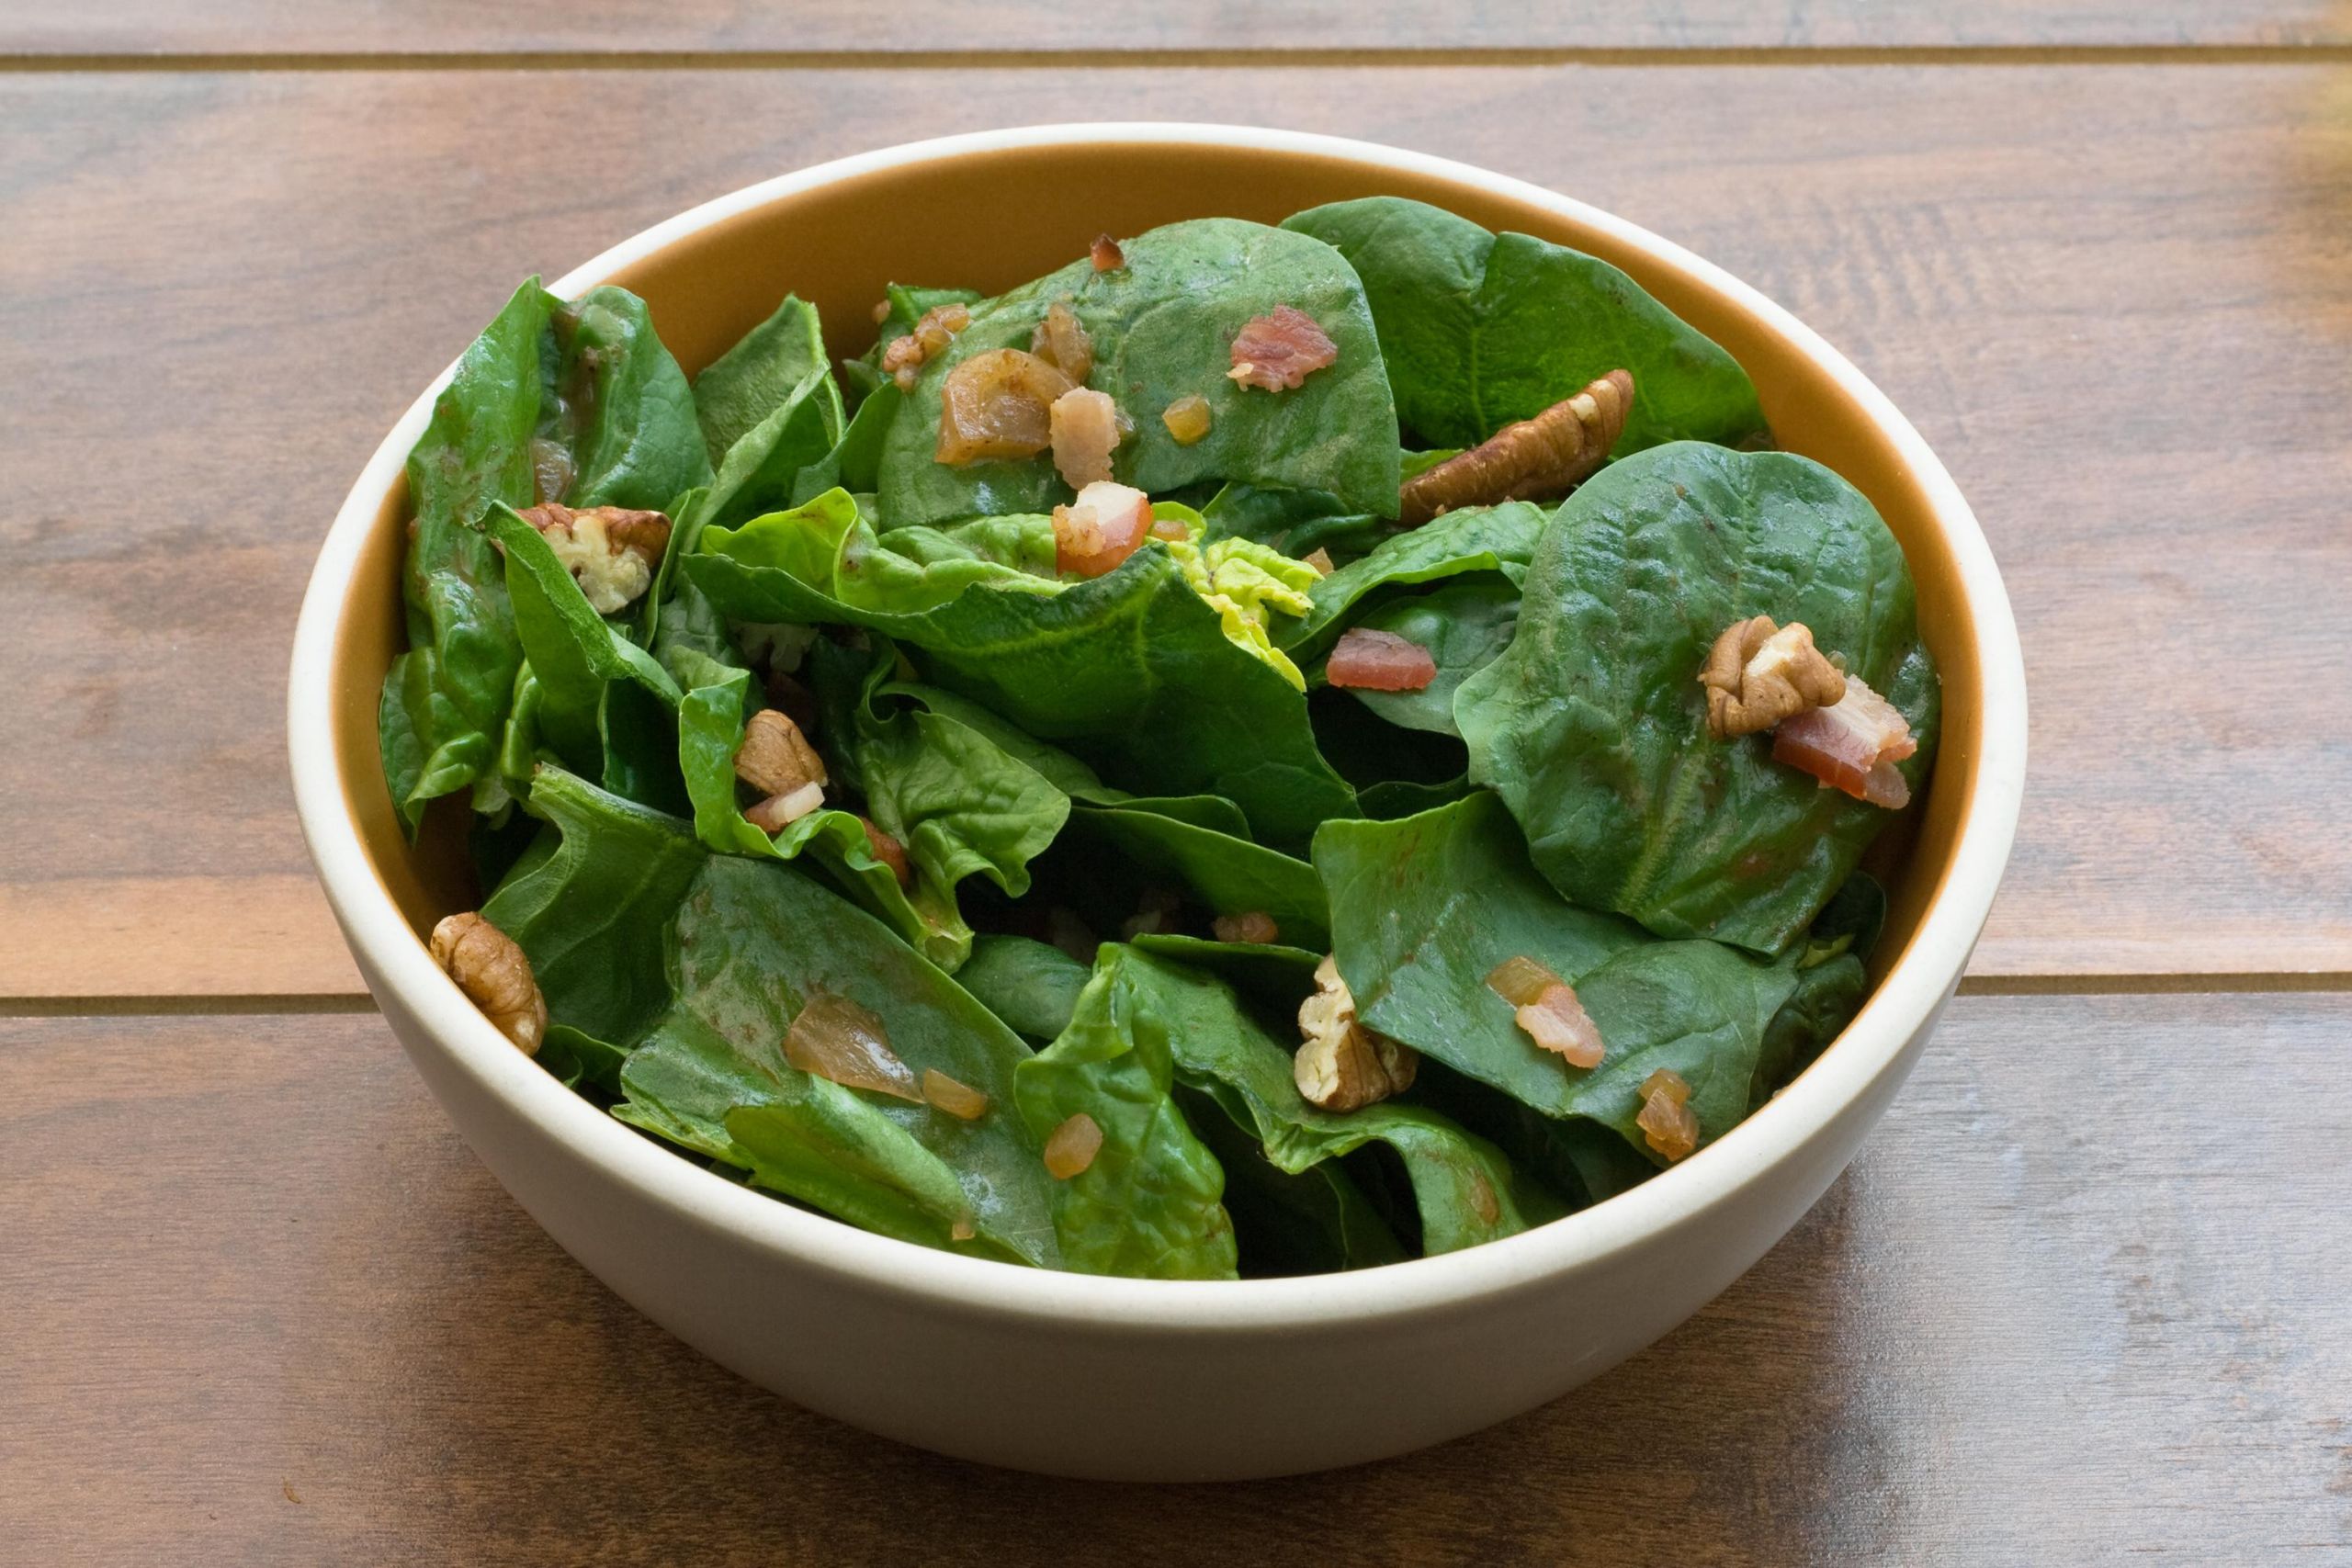 Salad Dressings For Spinach Salad
 Spinach Salad with Warm Bacon Vinaigrette Recipe CHOW